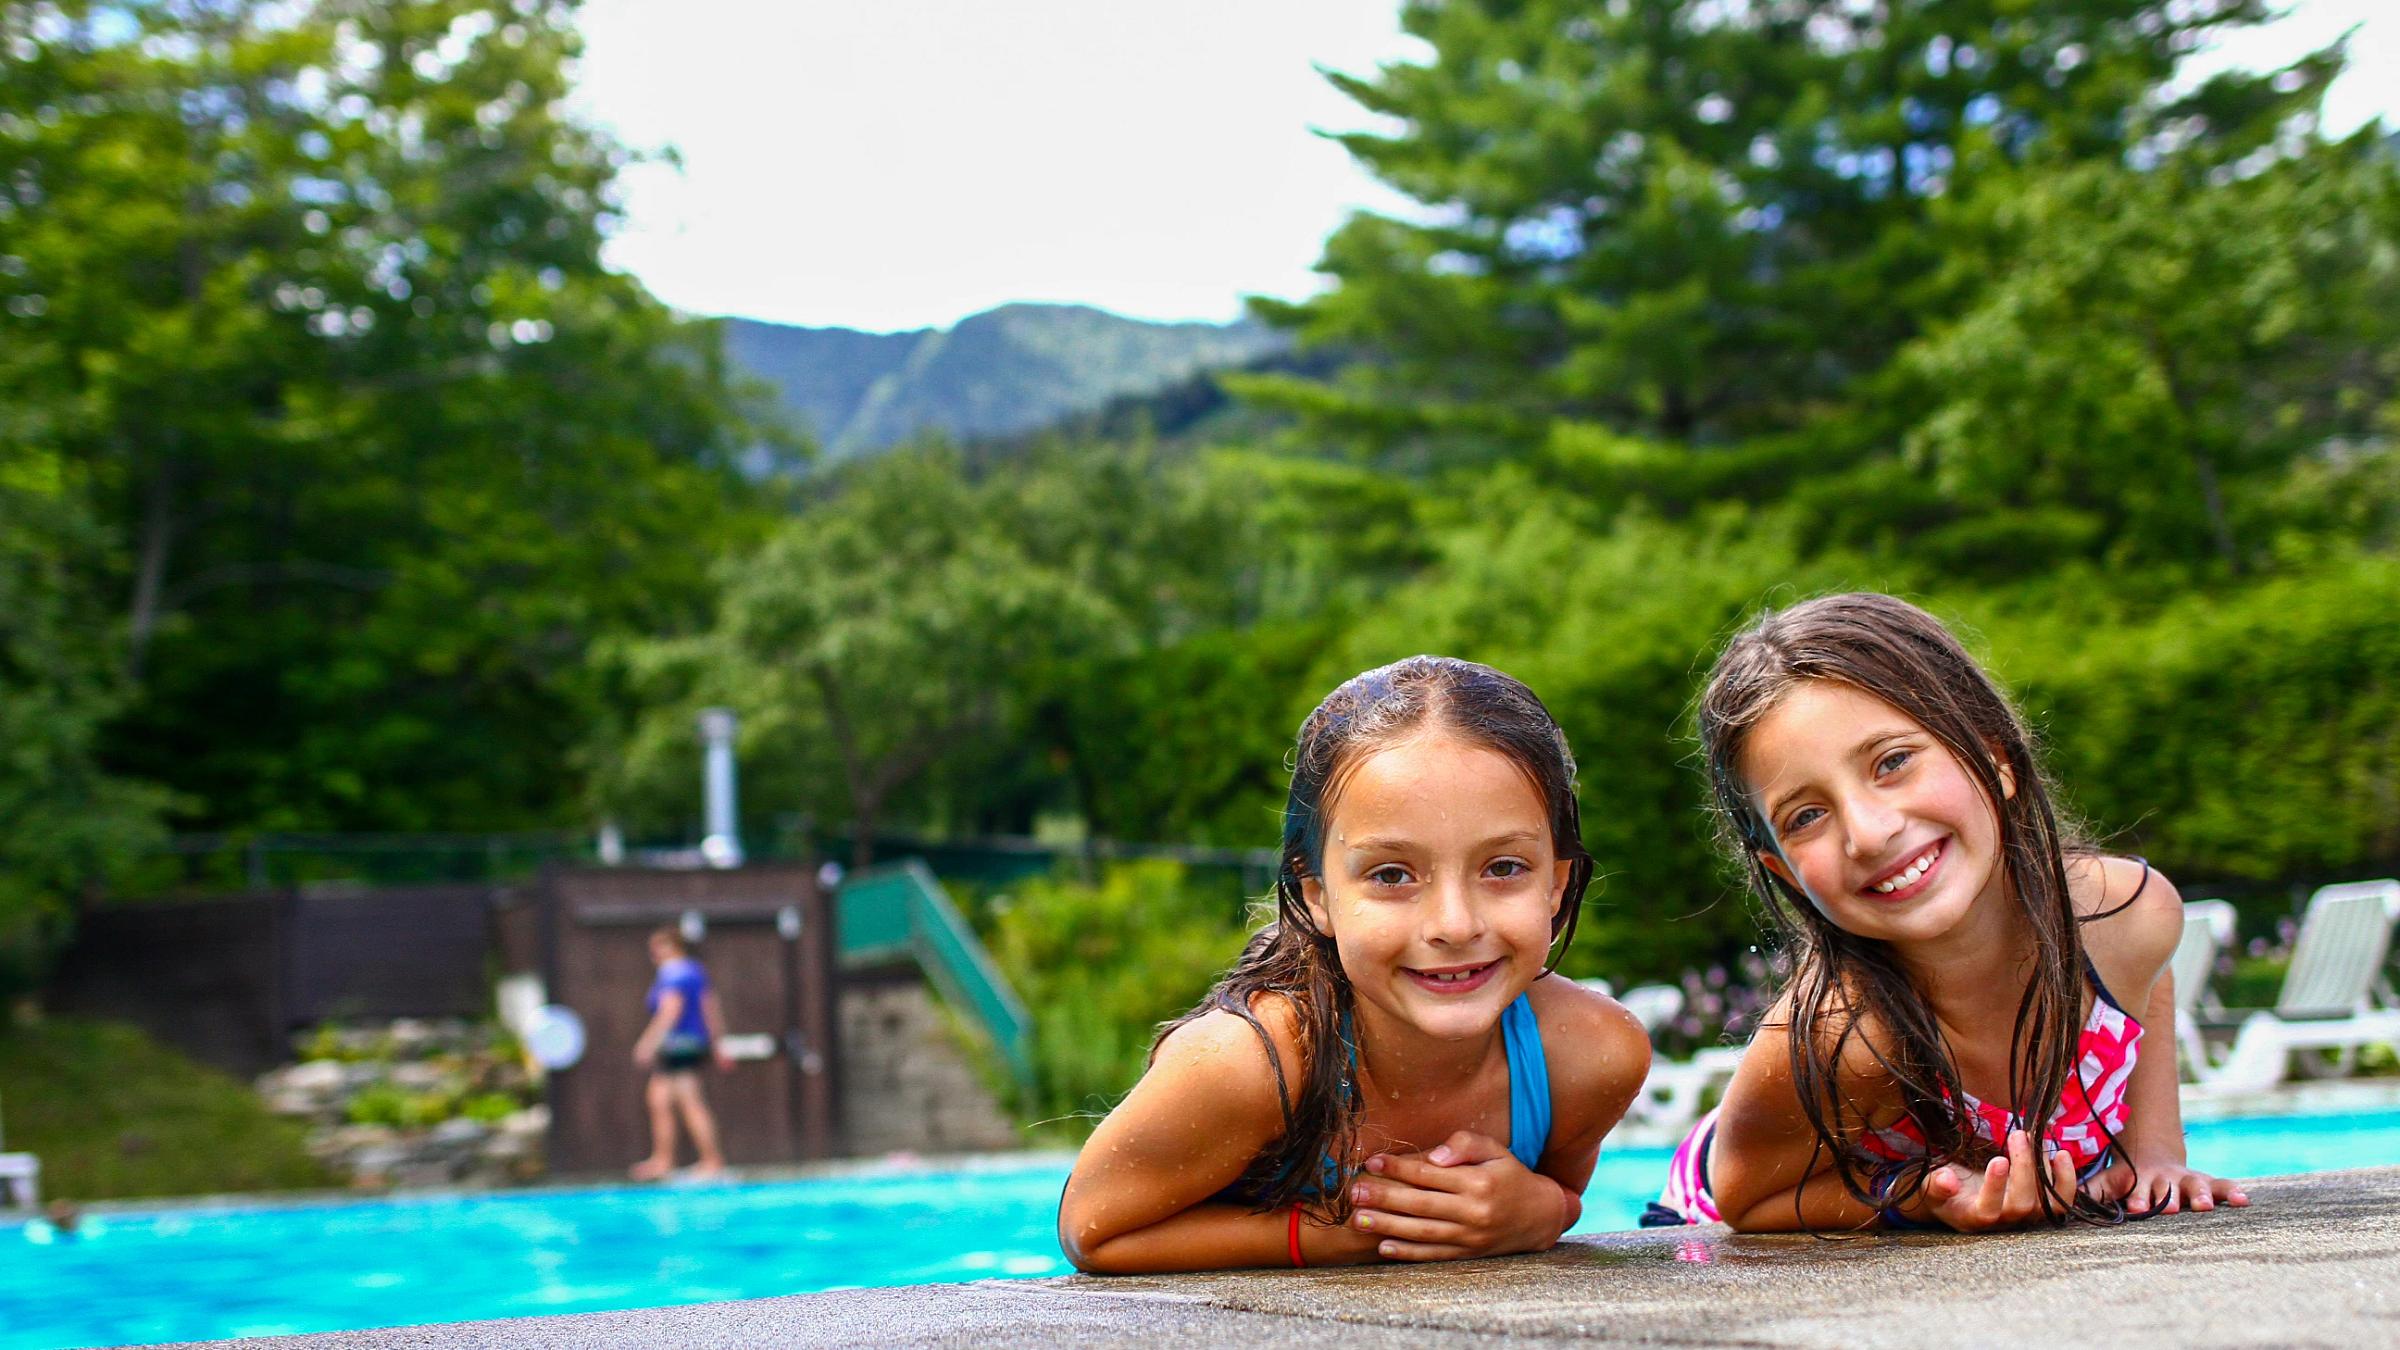 two young friends smiling at the pool